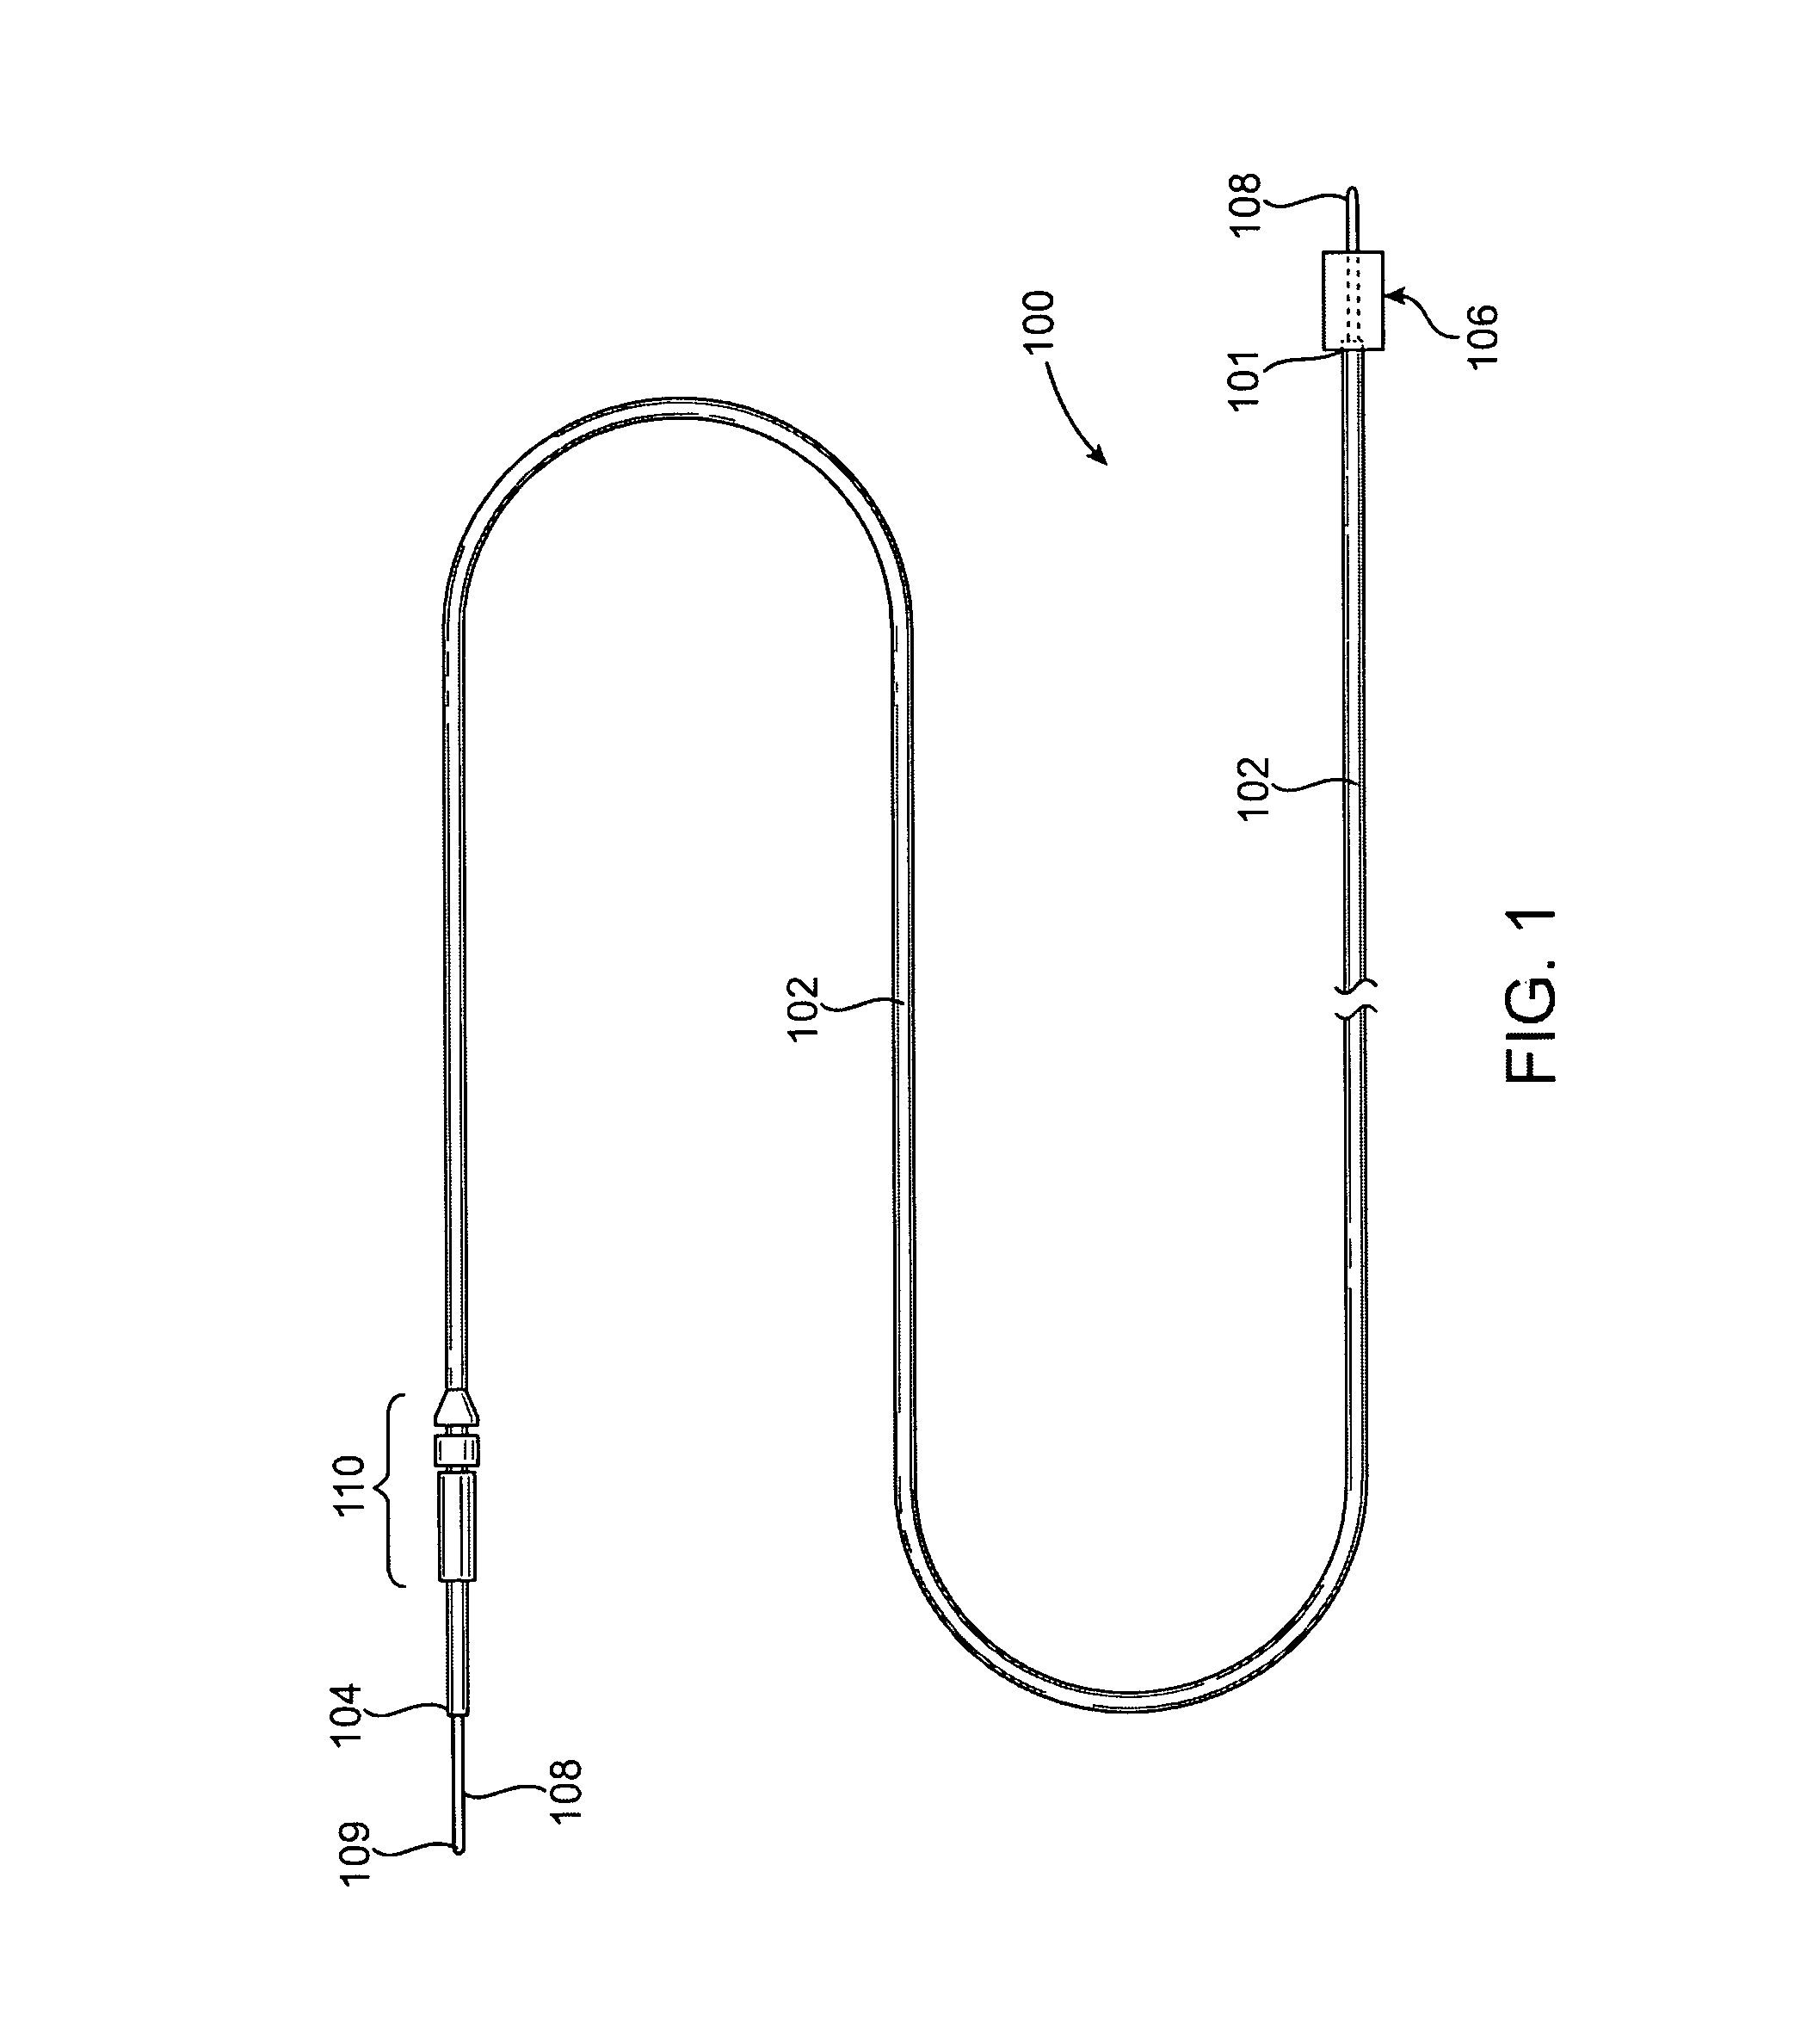 Device with actuatable fluid-column occluder for prevention of embolization